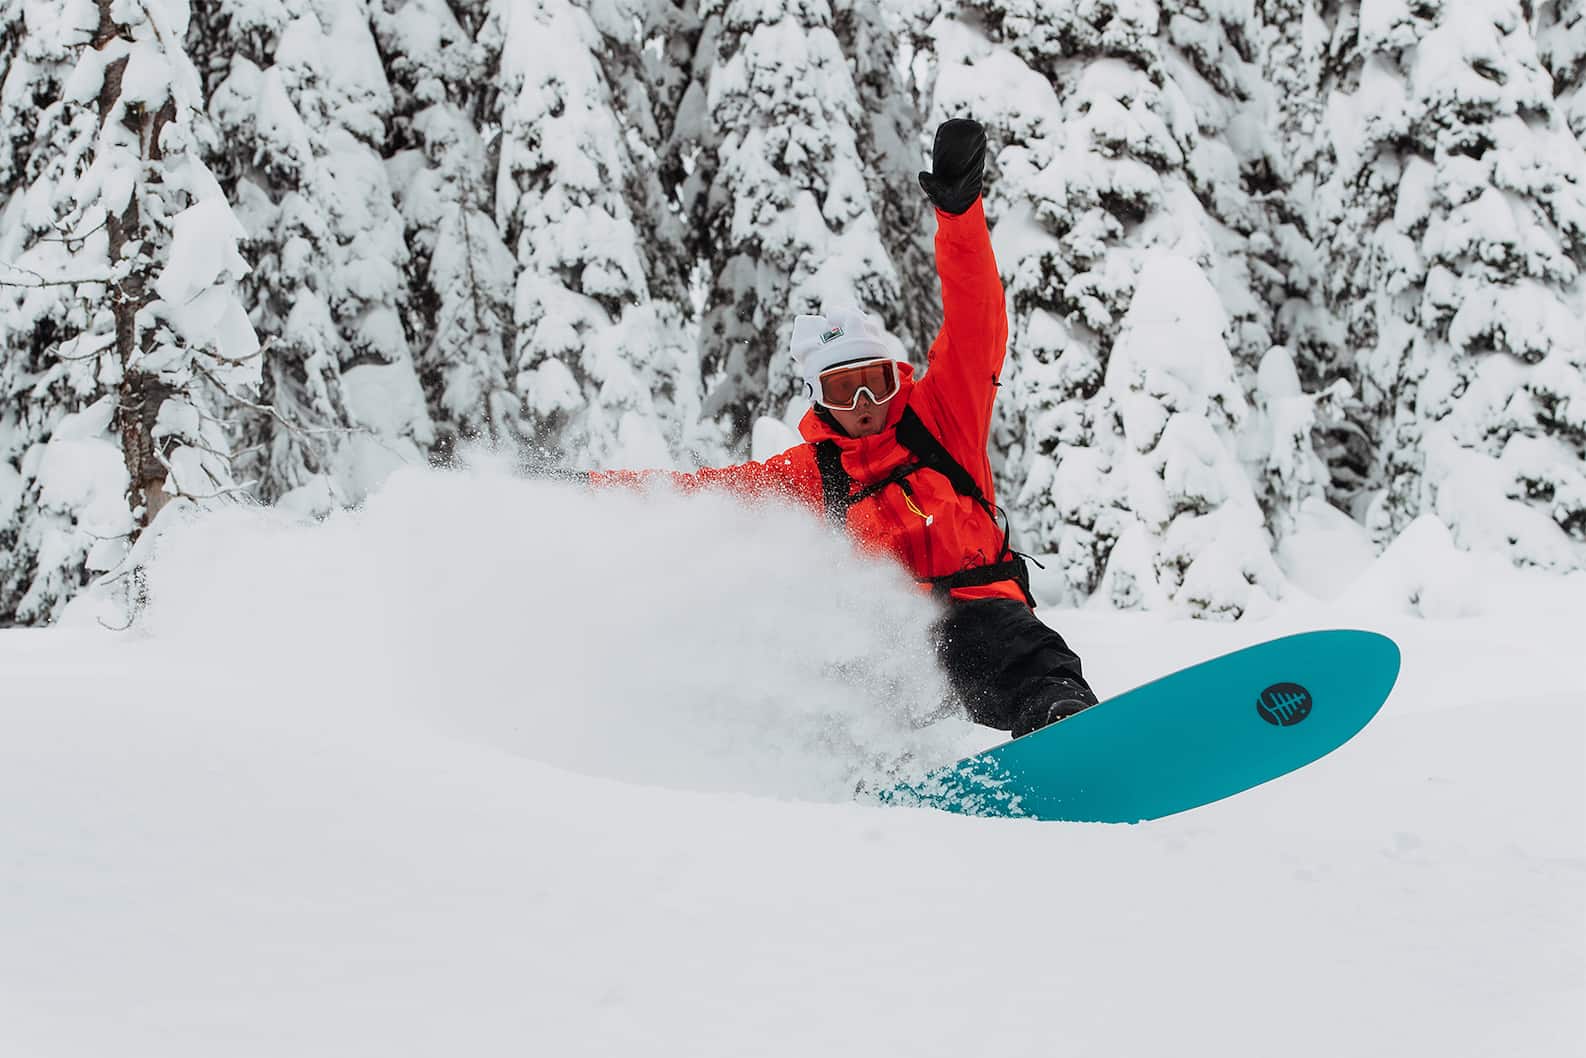 Powder Surfing 101: Getting Started with the Burton Backseat Driver |  Burton Snowboards